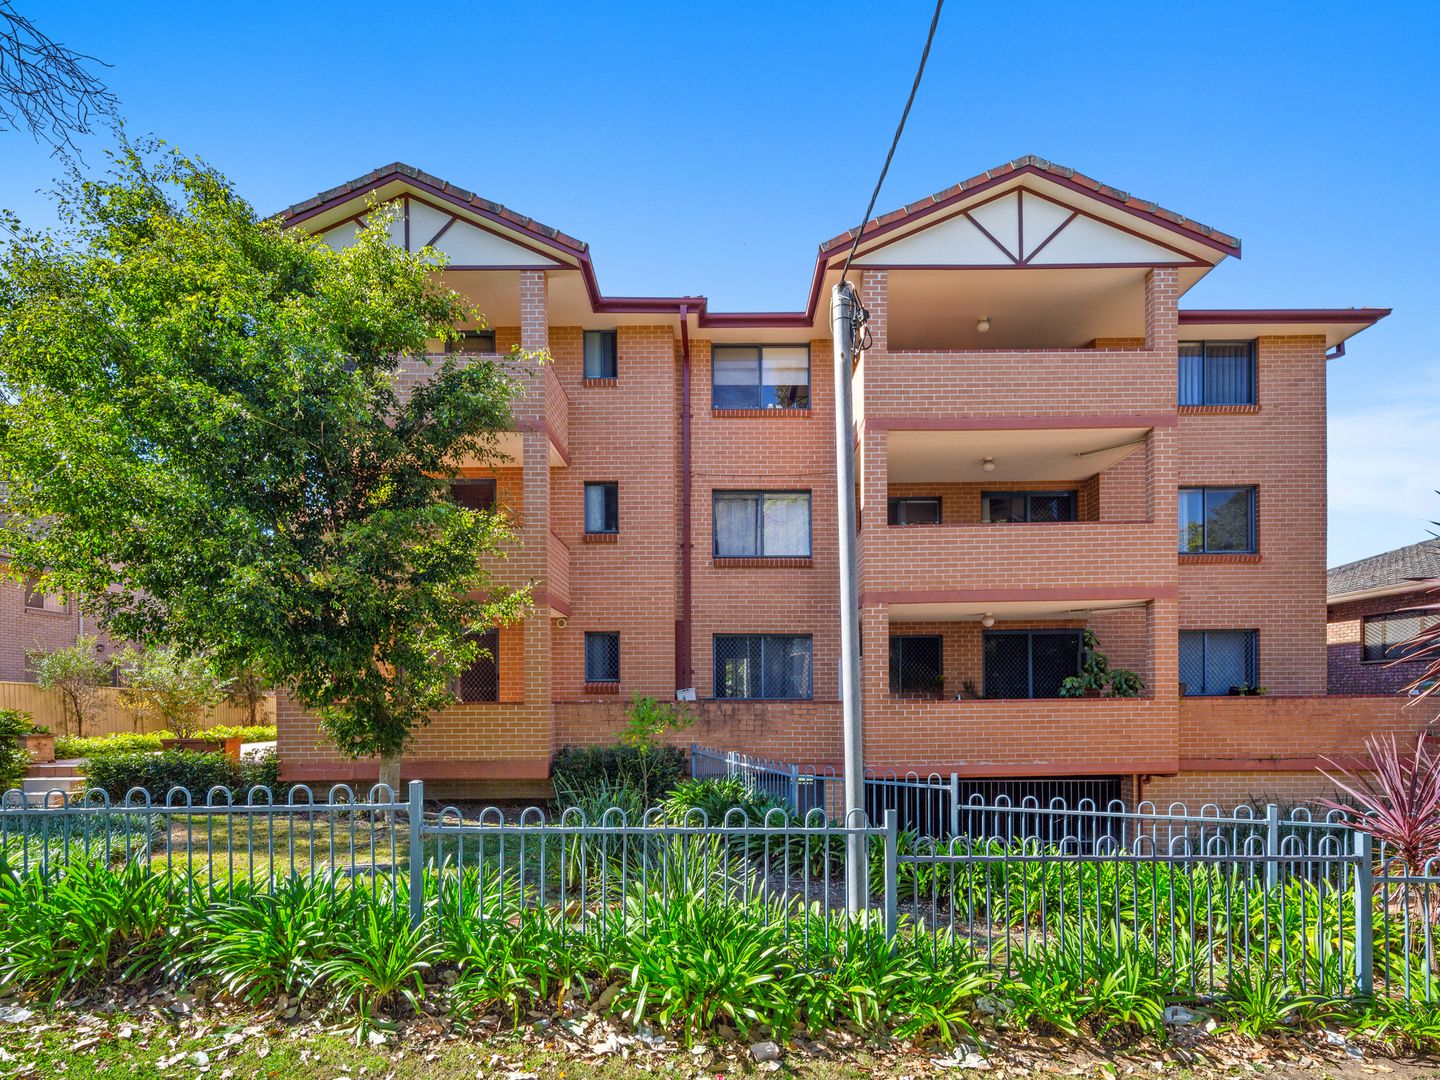 11/47 Cairds Avenue, Bankstown NSW 2200